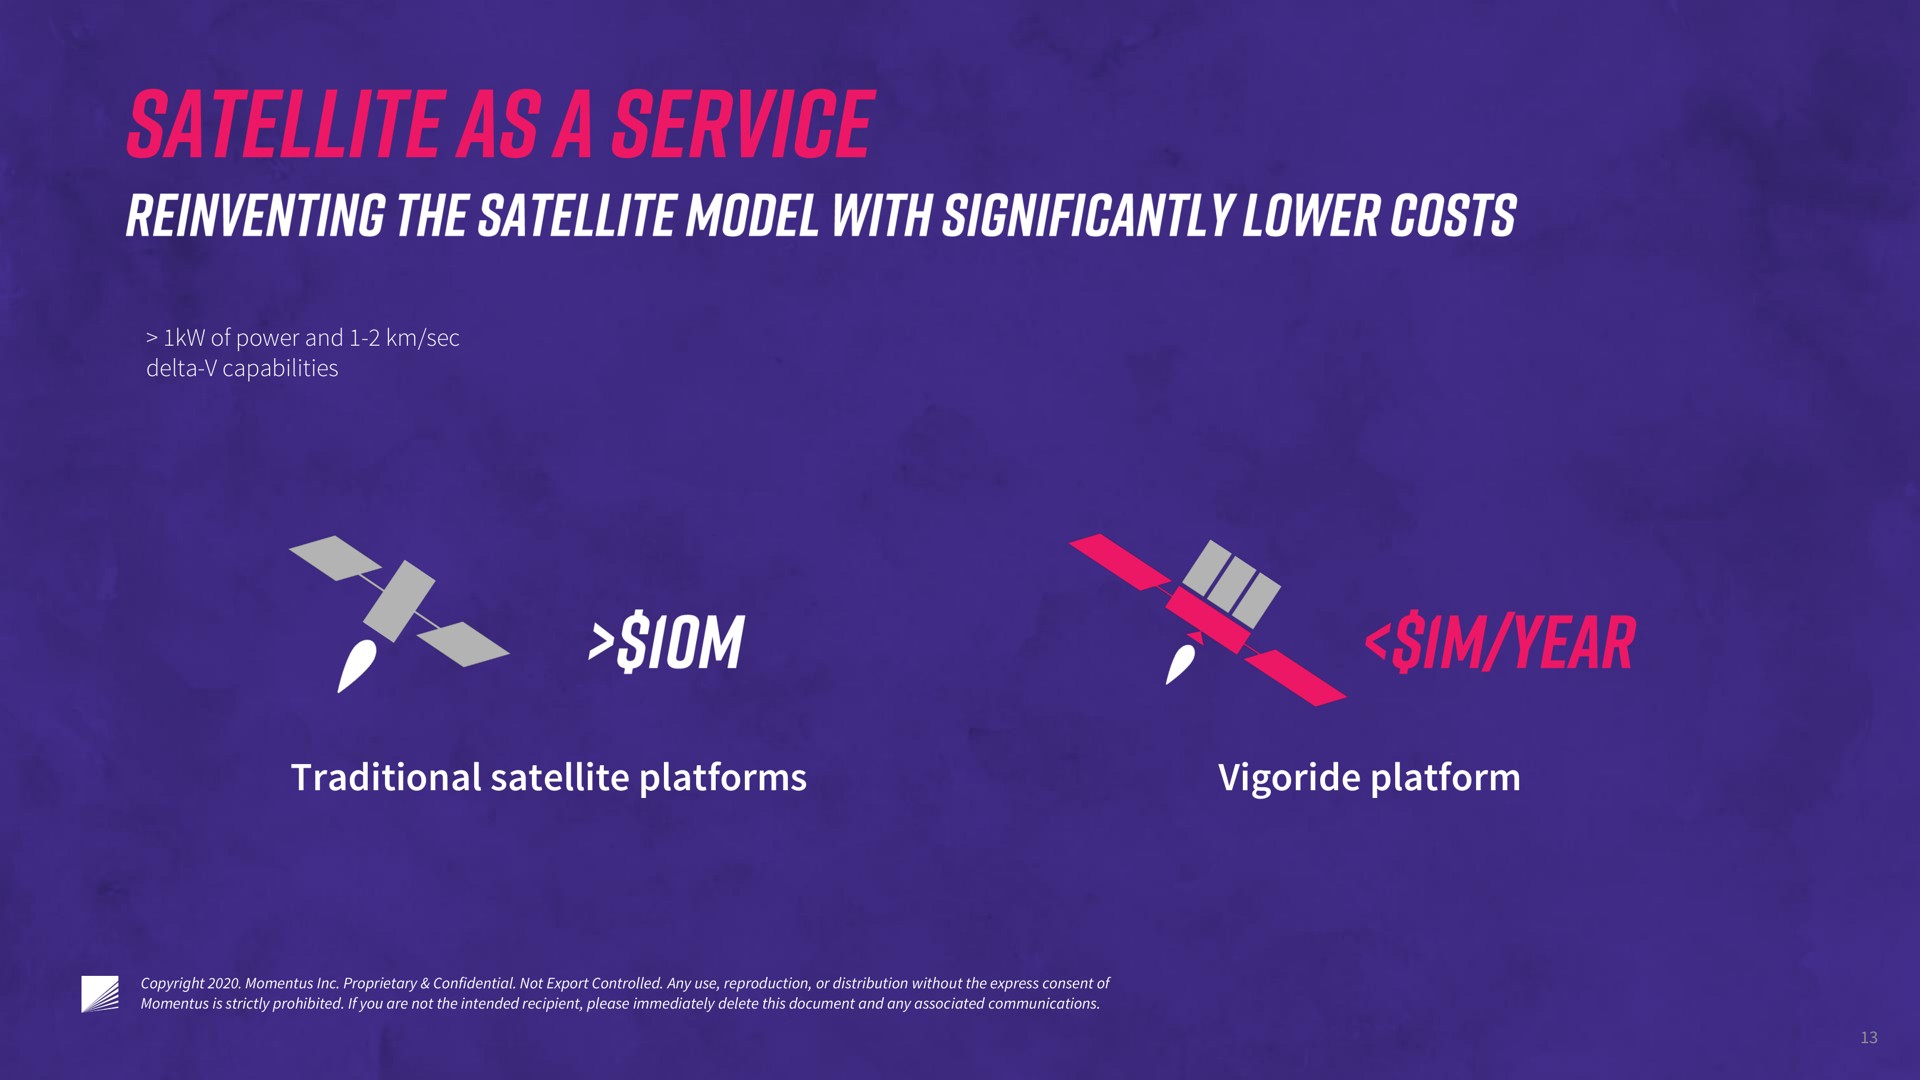 traditional satellite platforms platform reinventing the model with significantly lower costs a | Momentus